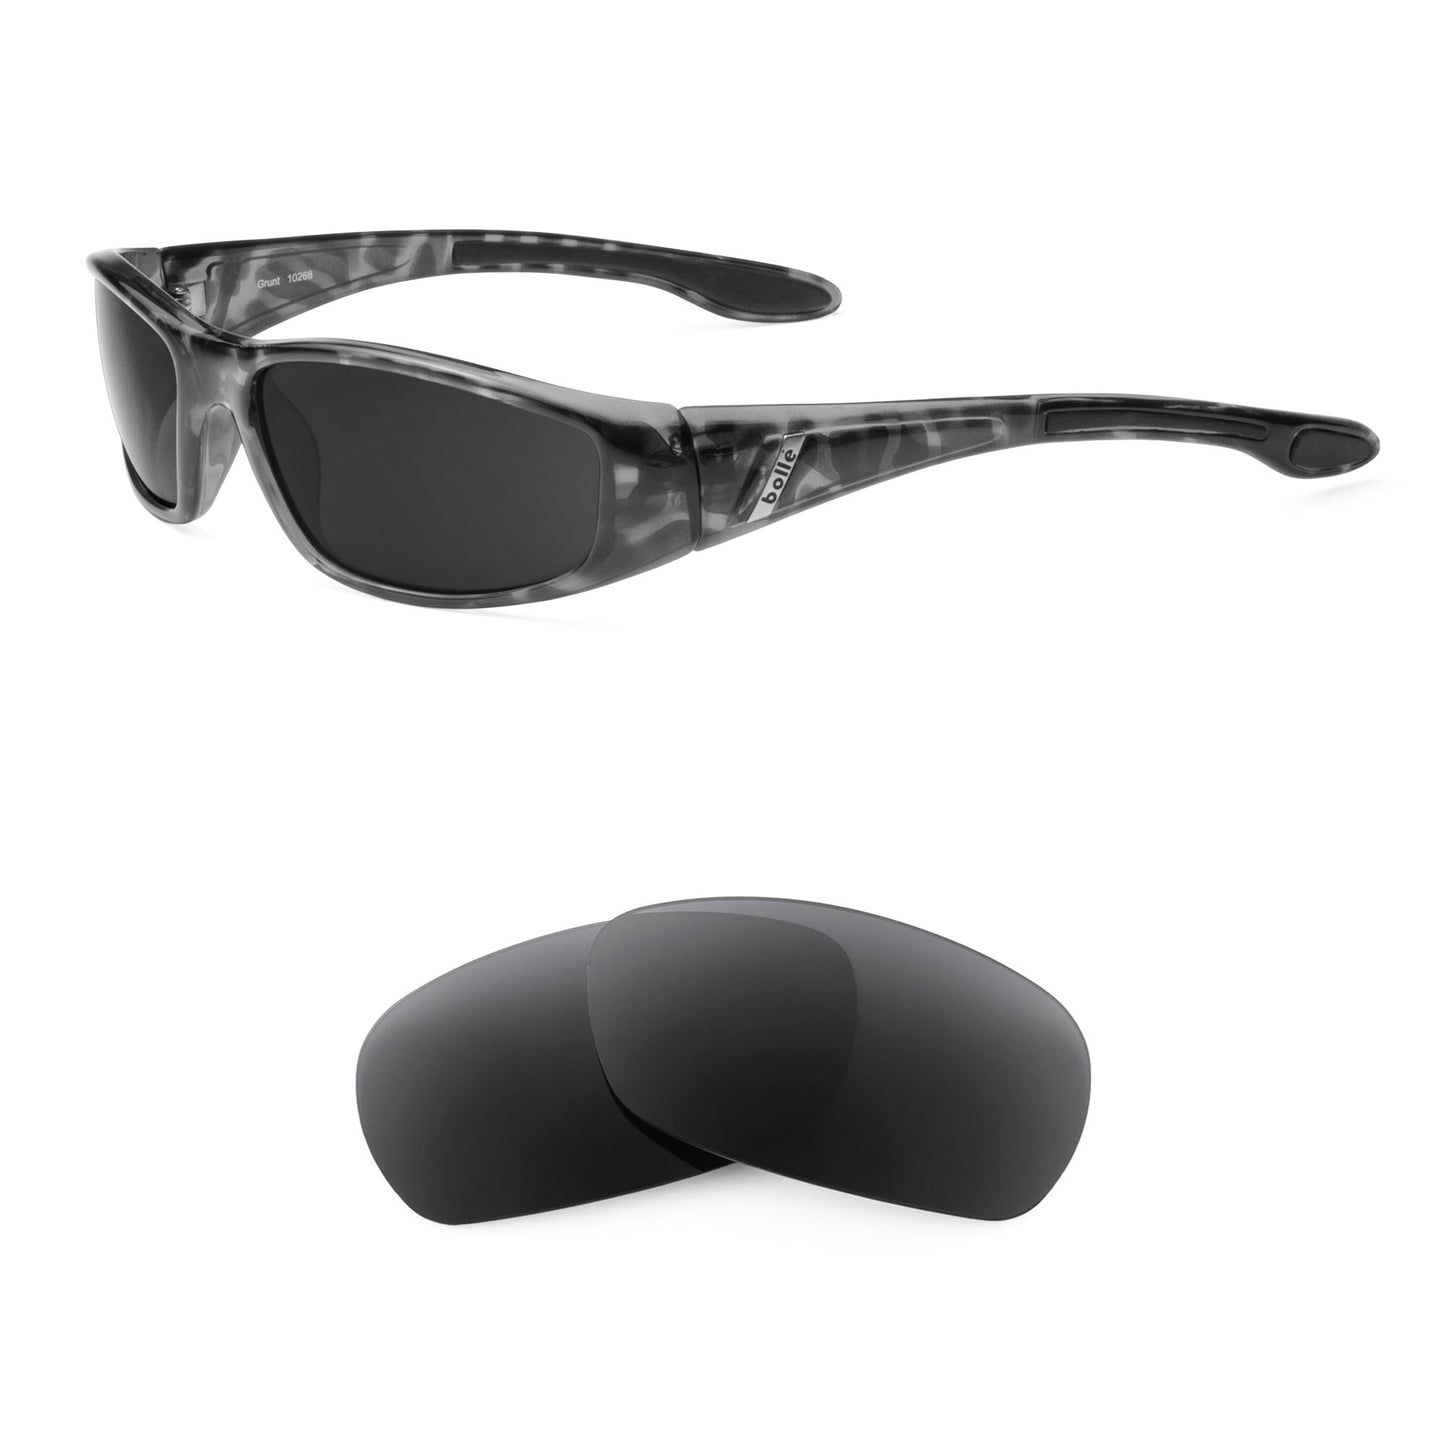 Bolle Grunt sunglasses with replacement lenses